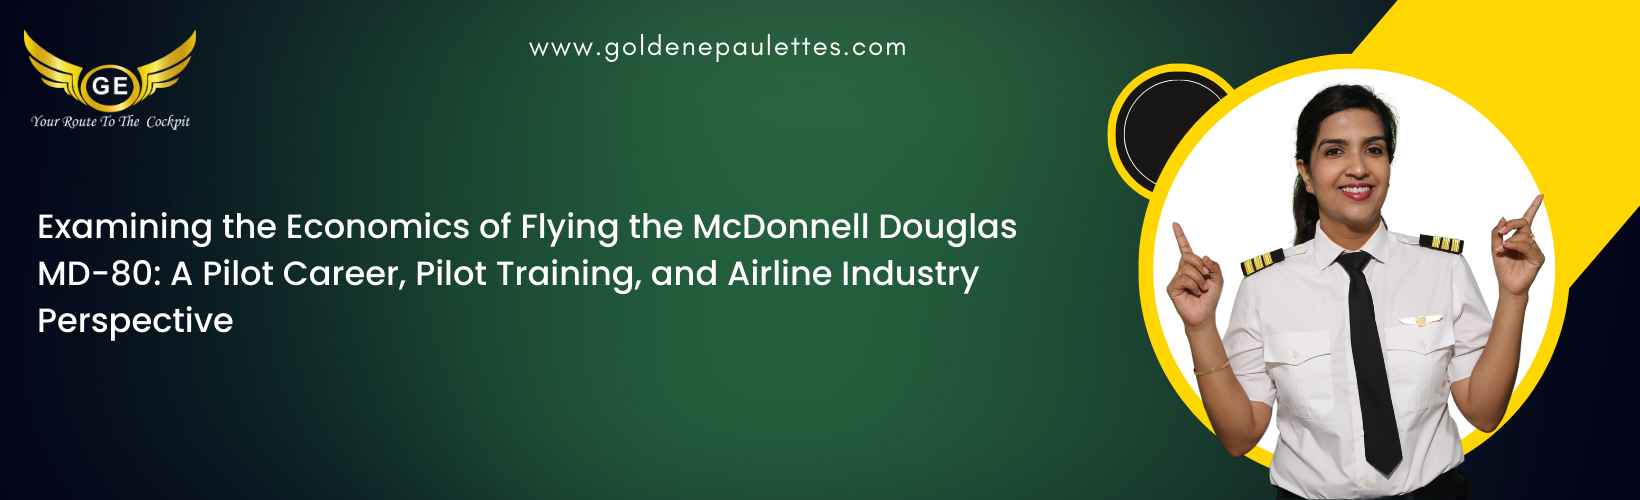 Examining the Economics of Flying the McDonnell Douglas MD